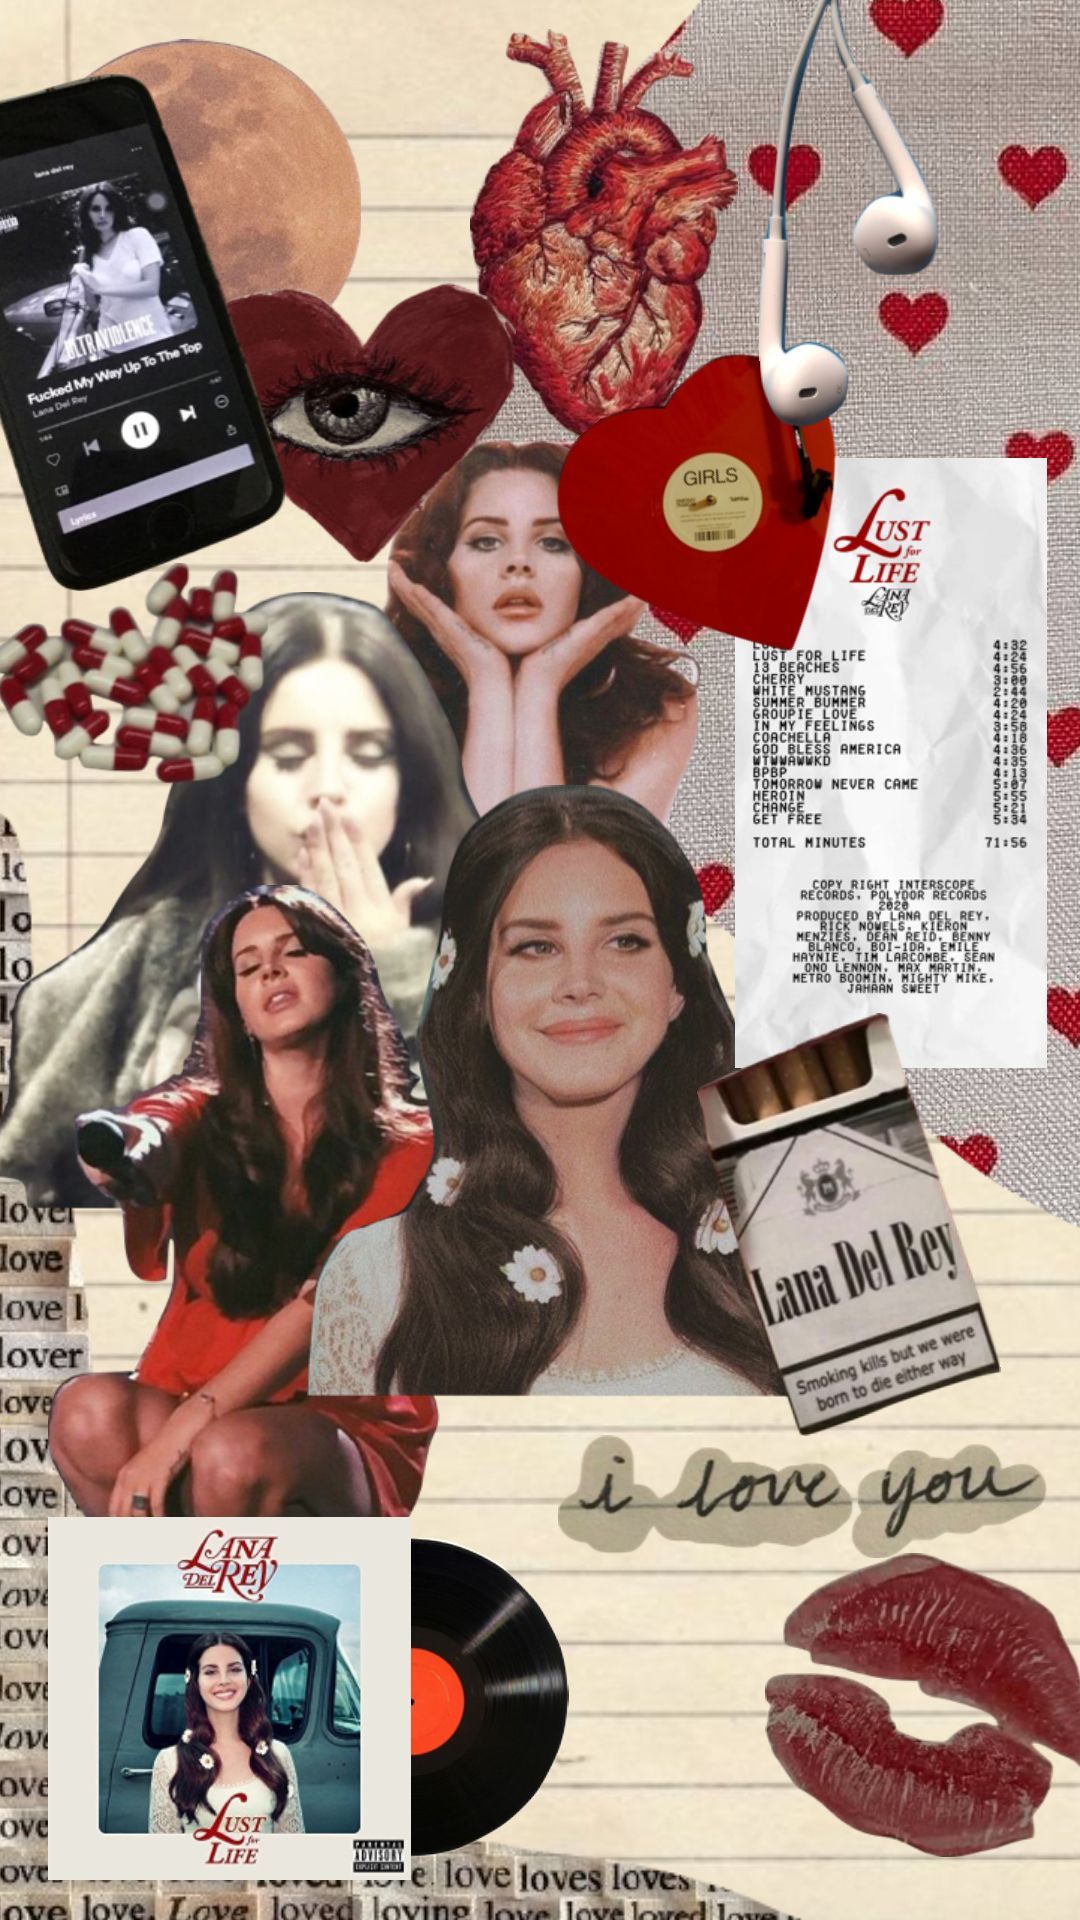 A collage of a woman, hearts, a phone, and music. - Lana Del Rey